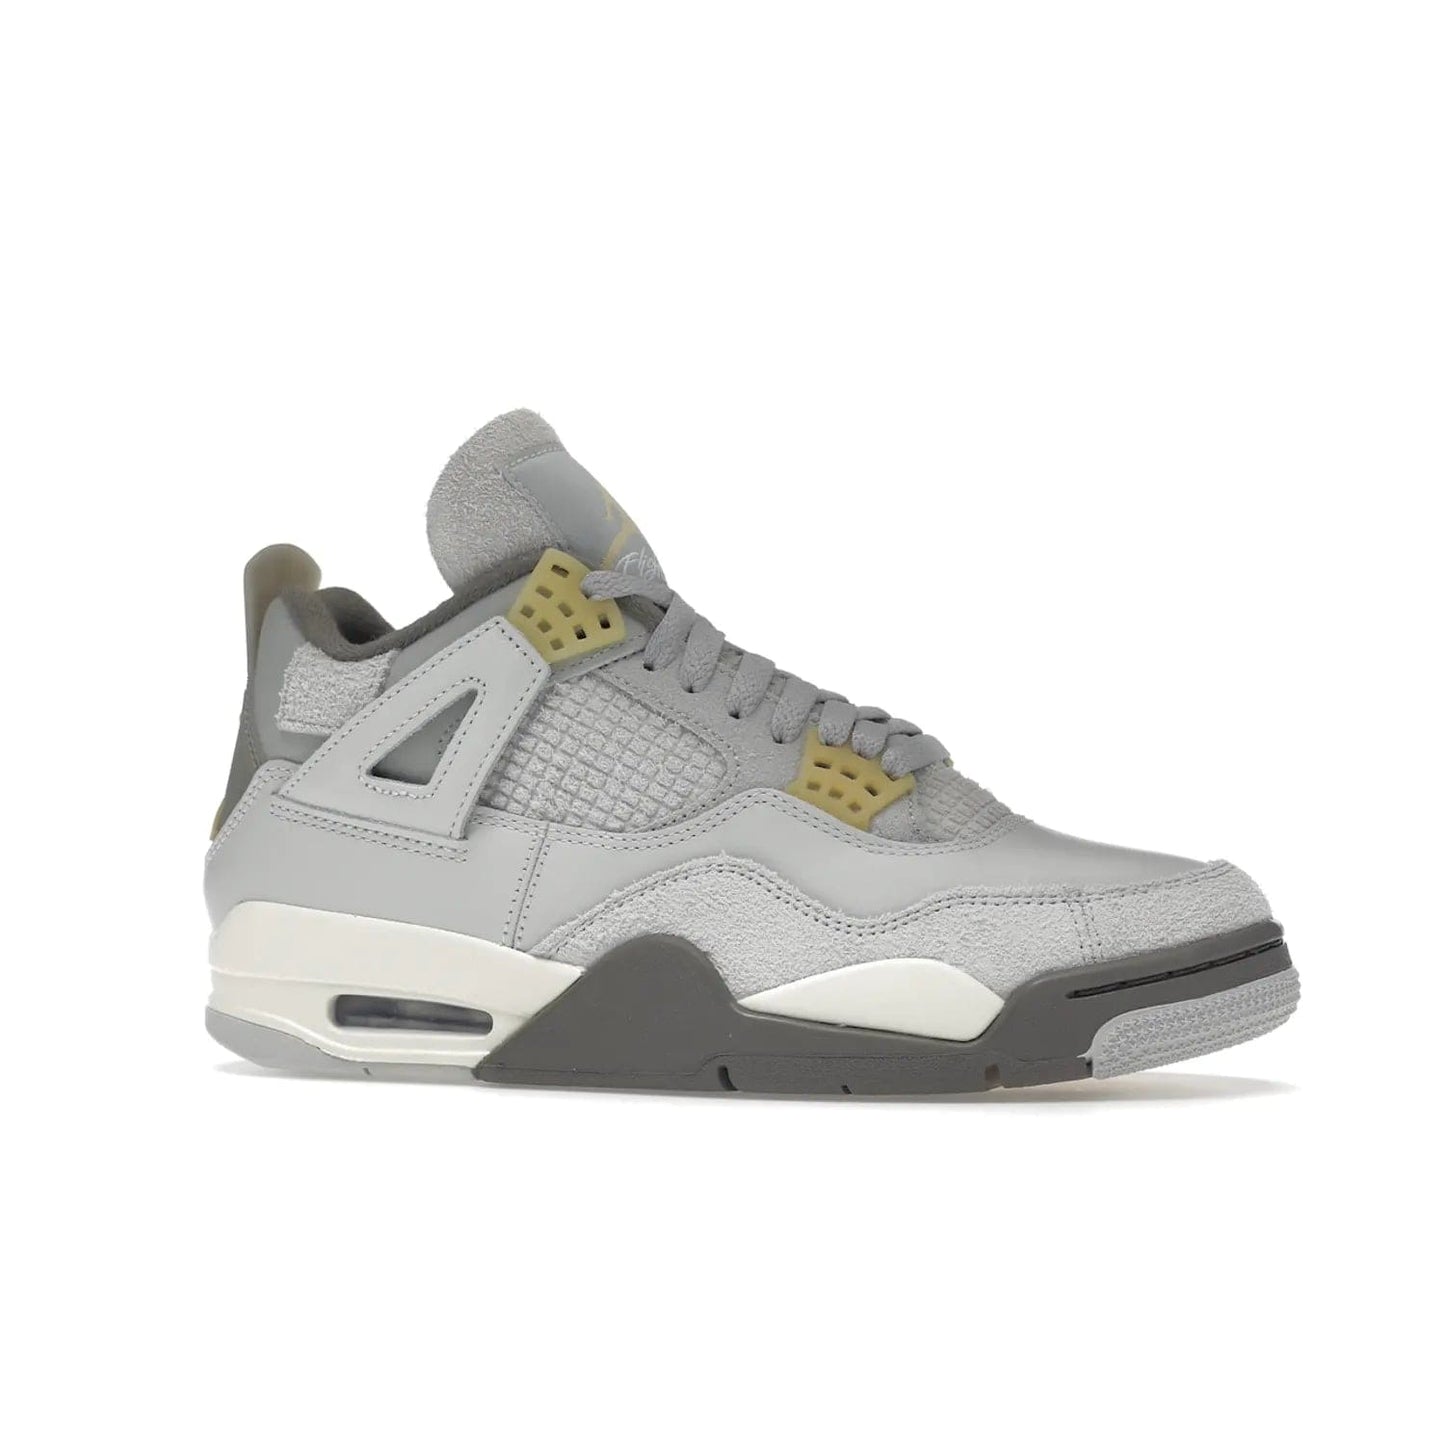 Jordan 4 Retro SE Craft Photon Dust - Image 3 - Only at www.BallersClubKickz.com - Upgrade your shoe collection with the Air Jordan 4 Retro SE Craft Photon Dust. This luxurious sneaker features a combination of suede and leather with unique grey tones like Photon Dust, Pale Vanilla, Off White, Grey Fog, Flat Pewter, and Sail. Available February 11, 2023.